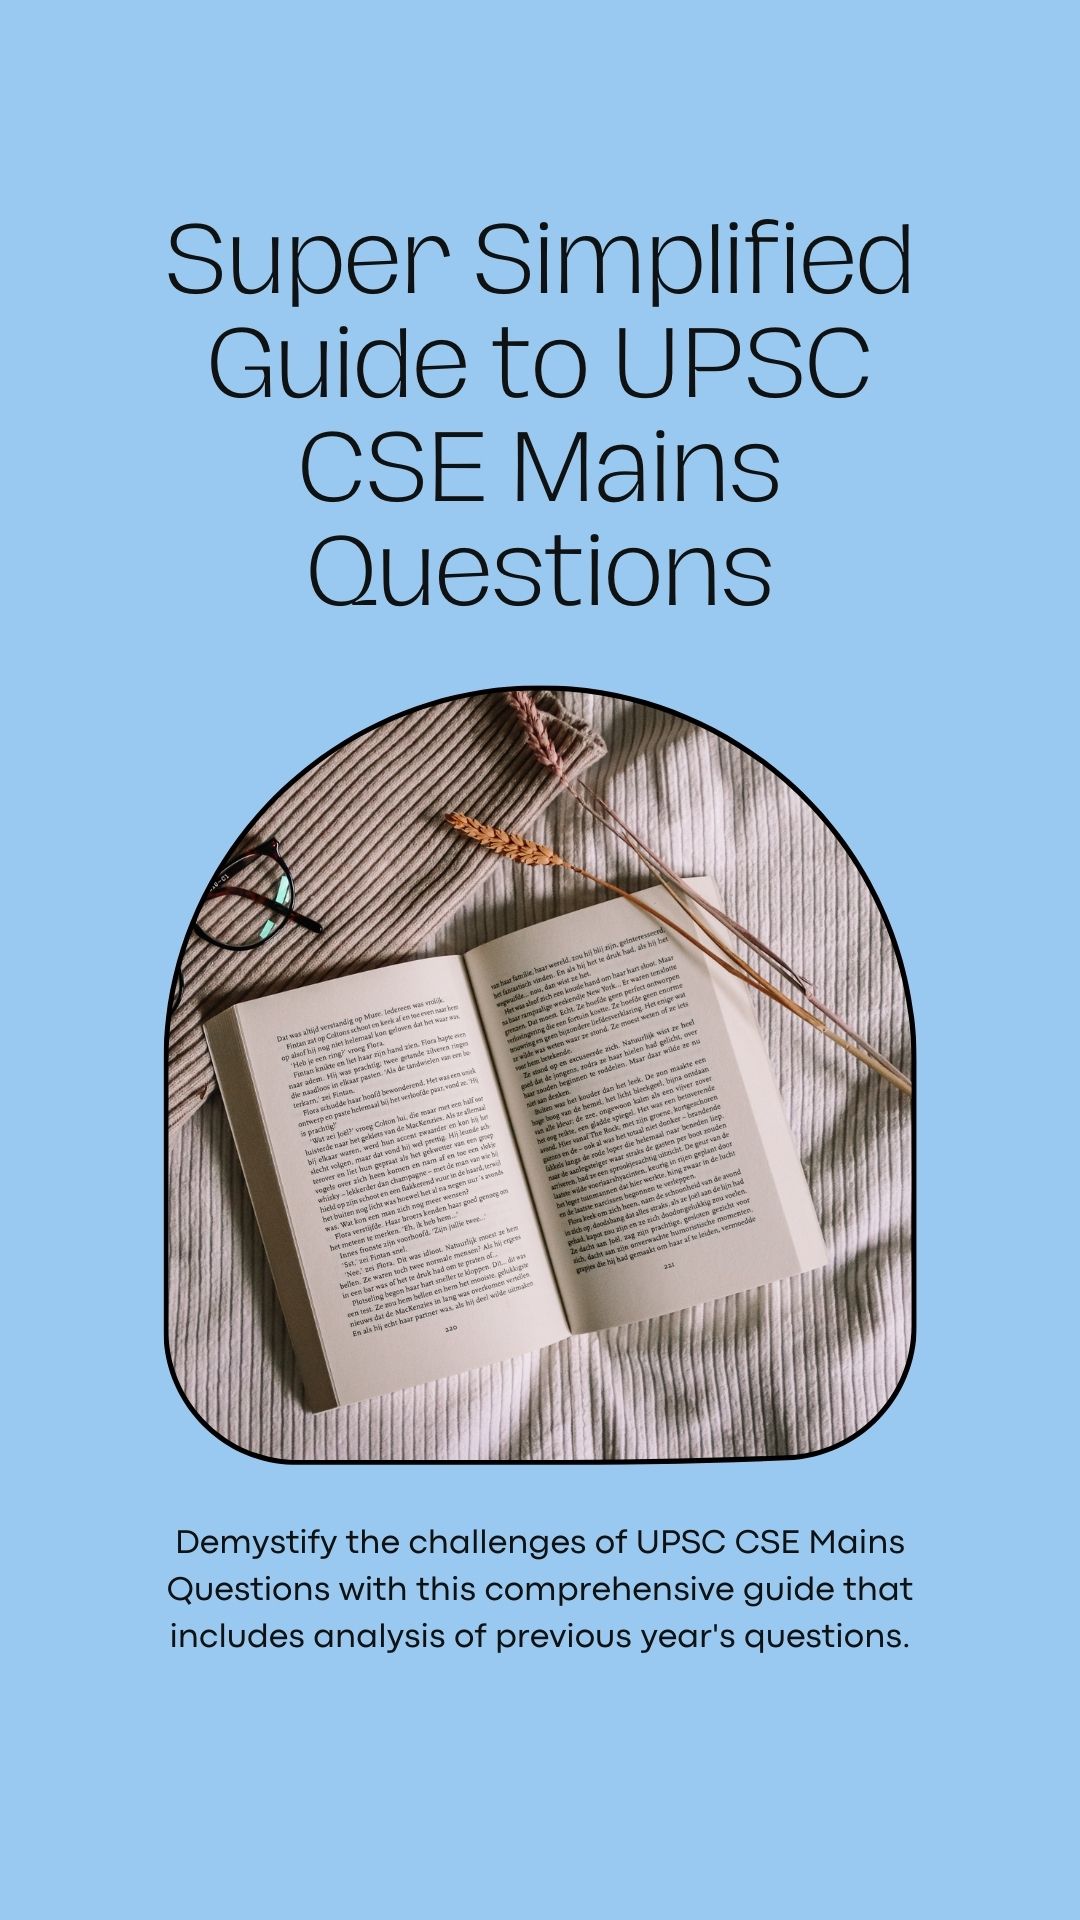 demystifying upsc cse mains questions: a comprehensive guide with previous year questions analysis upsc super simplified